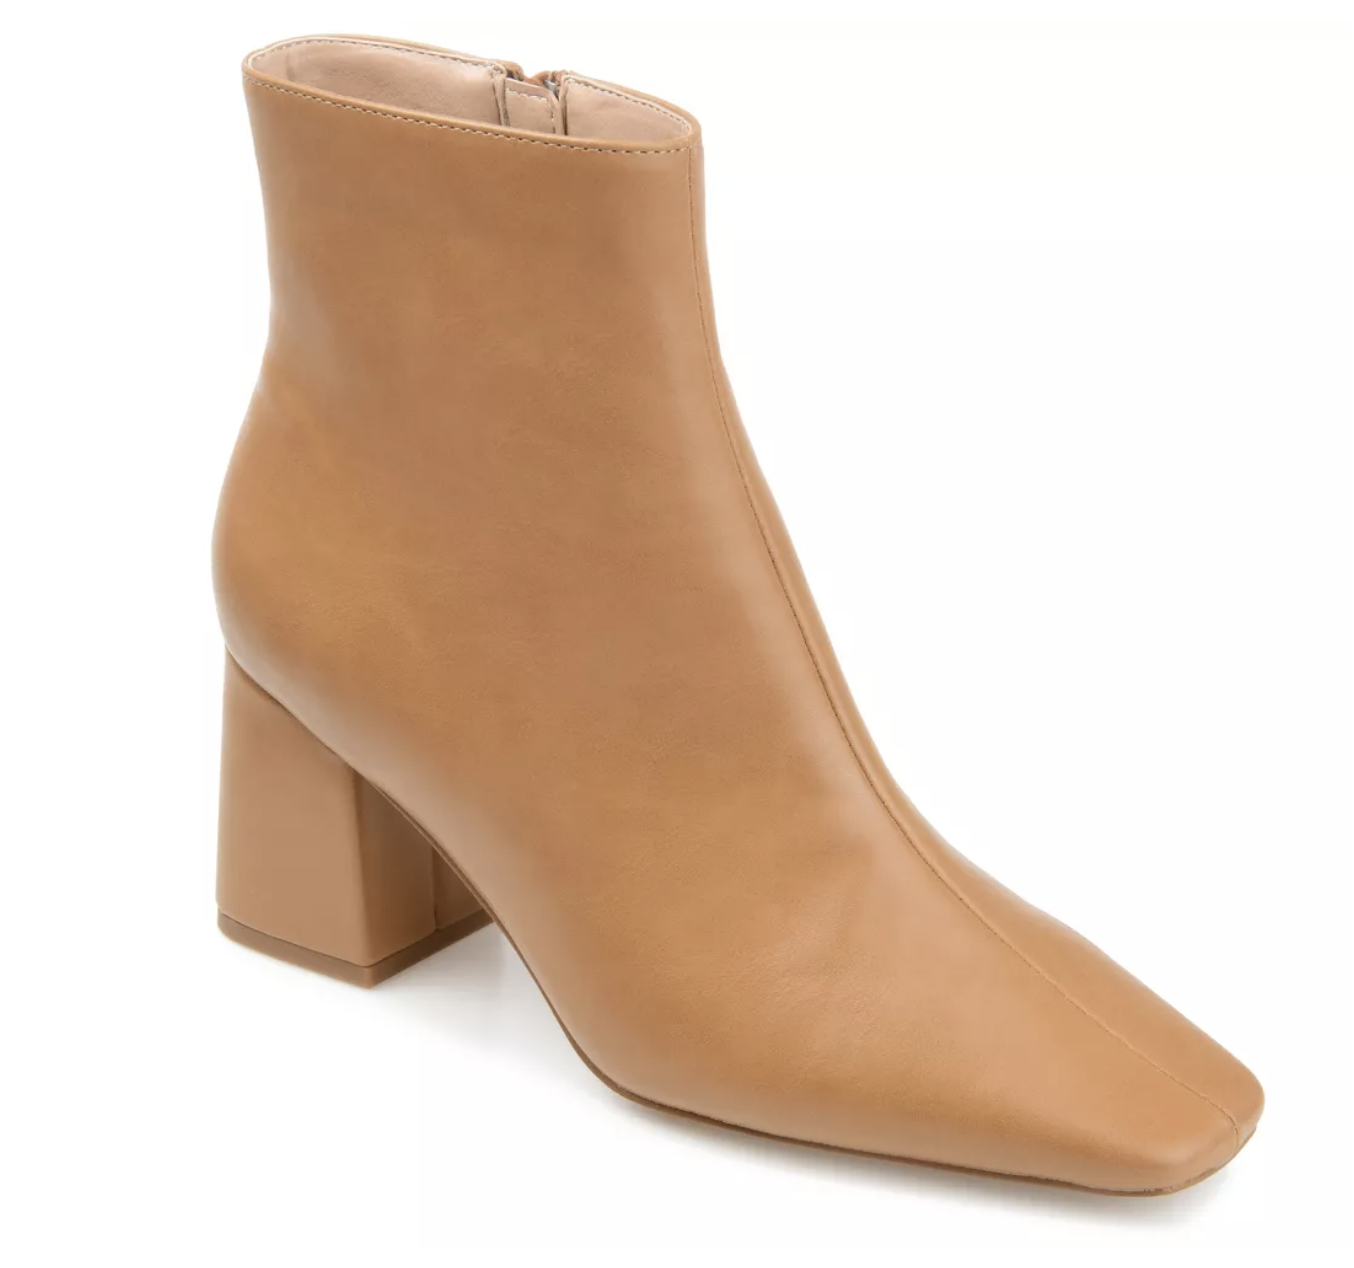 Beige ankle boot with a block heel, zipper closure showcased for shopping